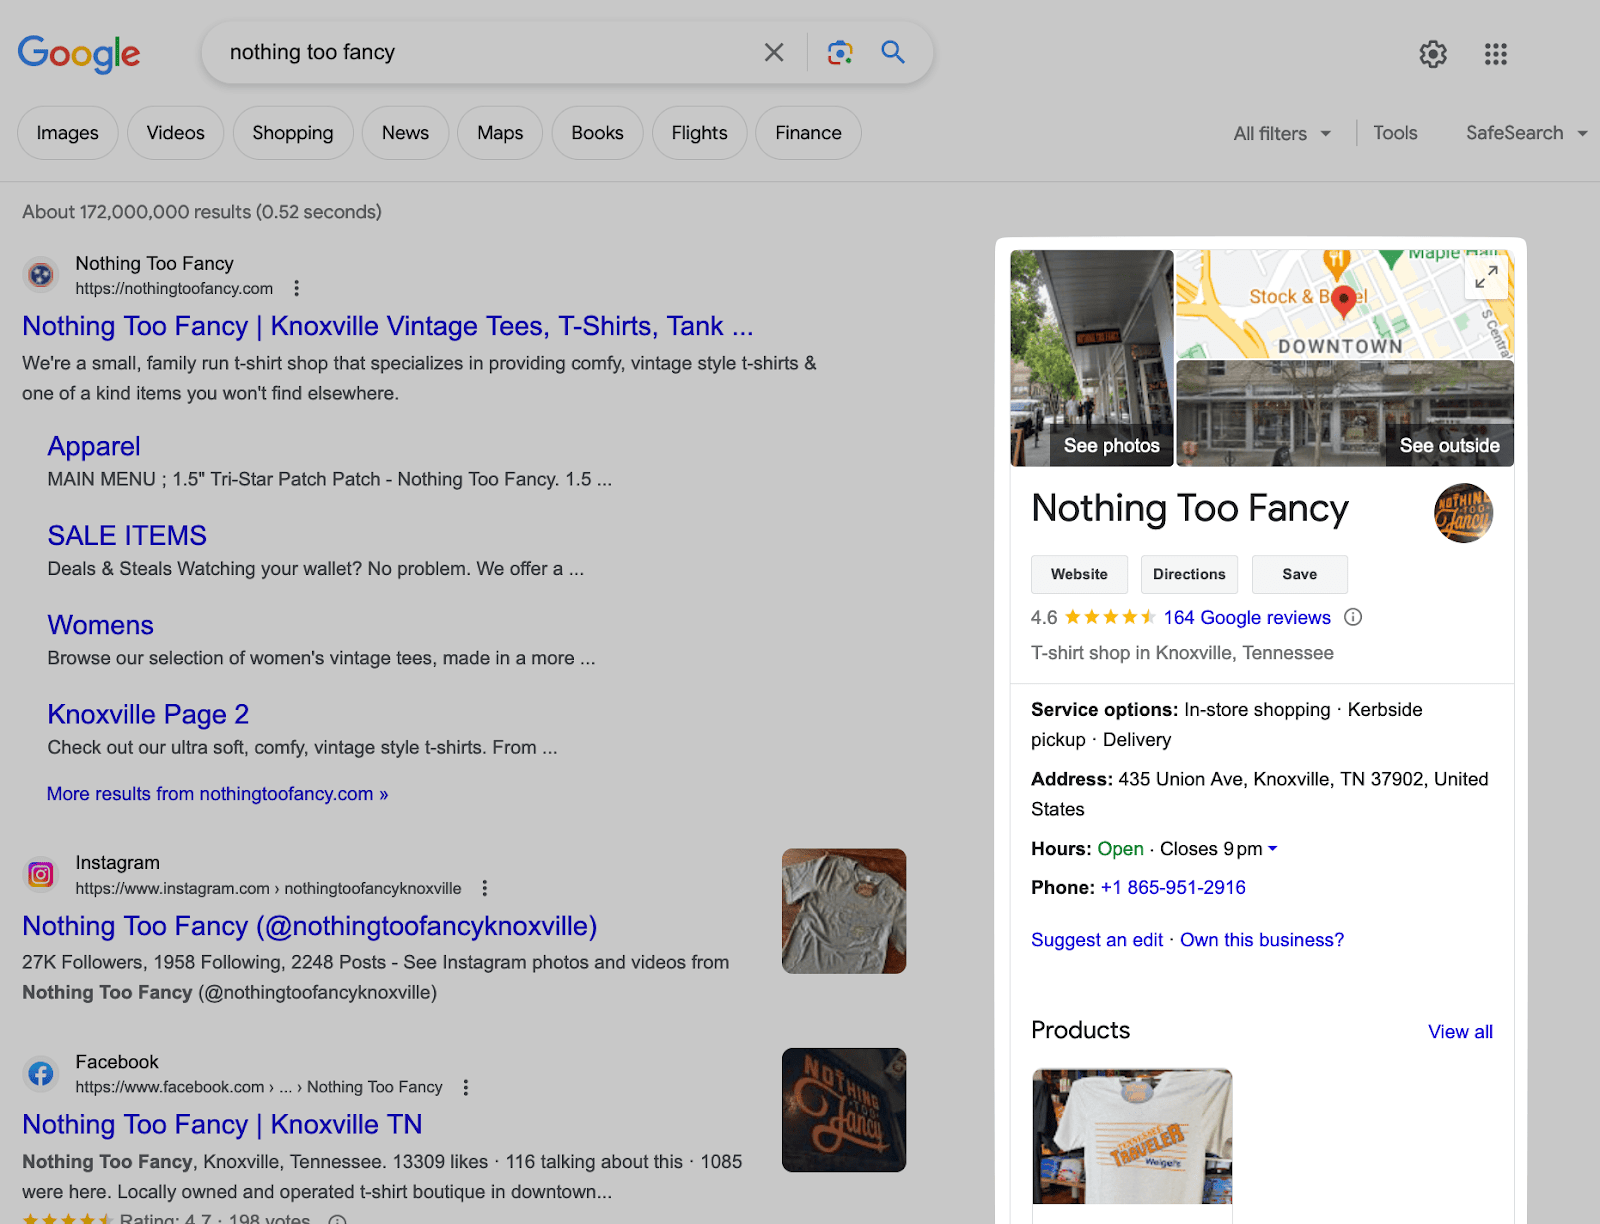 Nothing Too Fancy's Google business profile on search